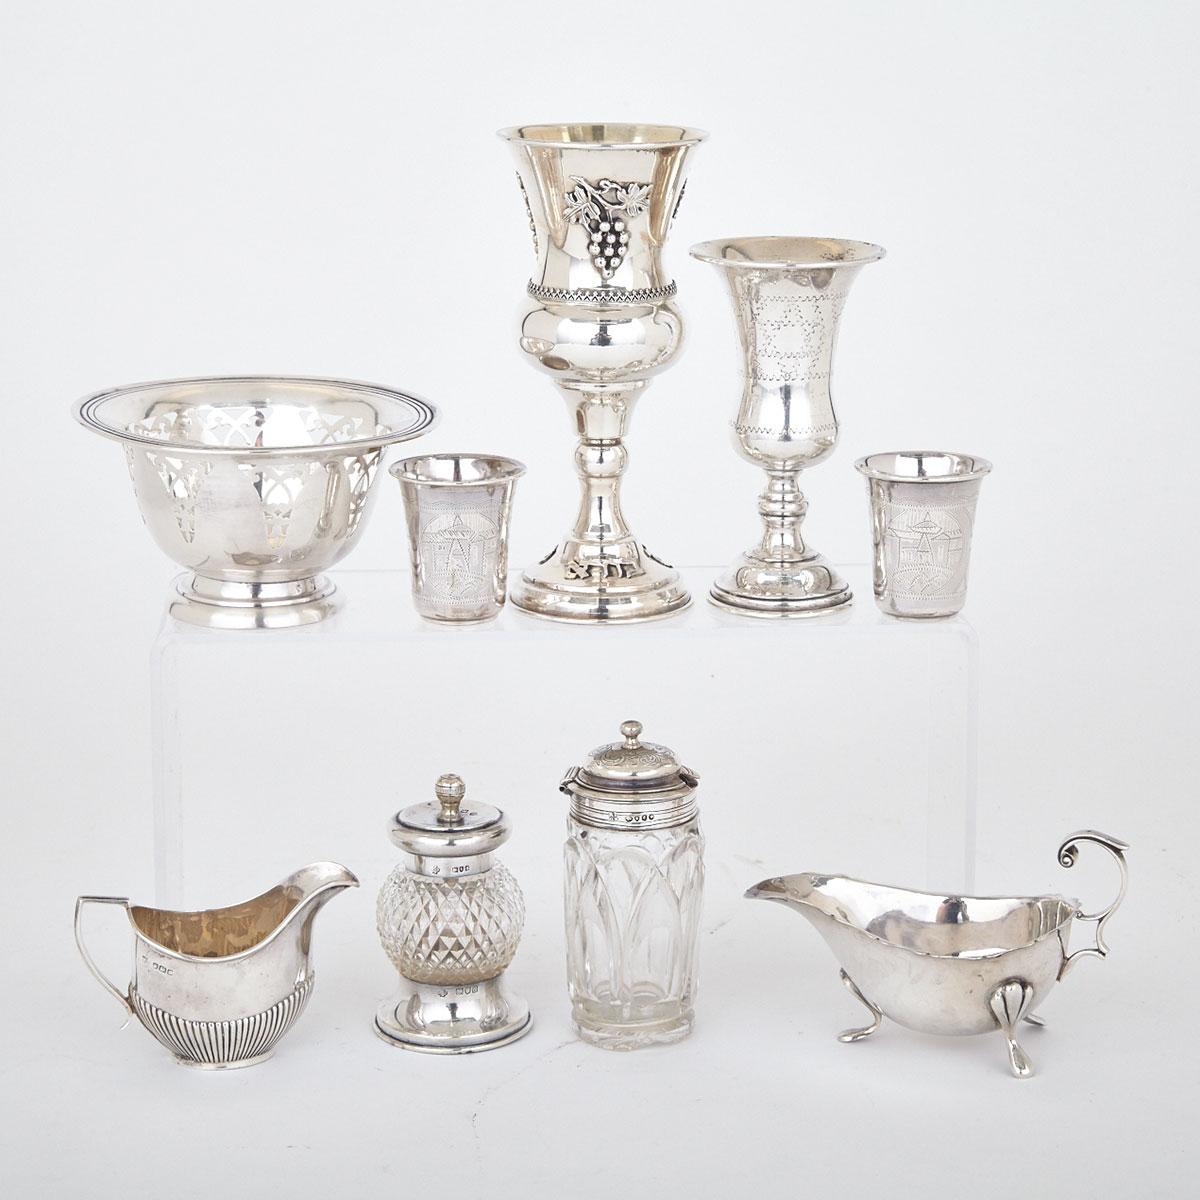 Grouped Lot of English, Continental and Canadian Silver, 19th/20th century